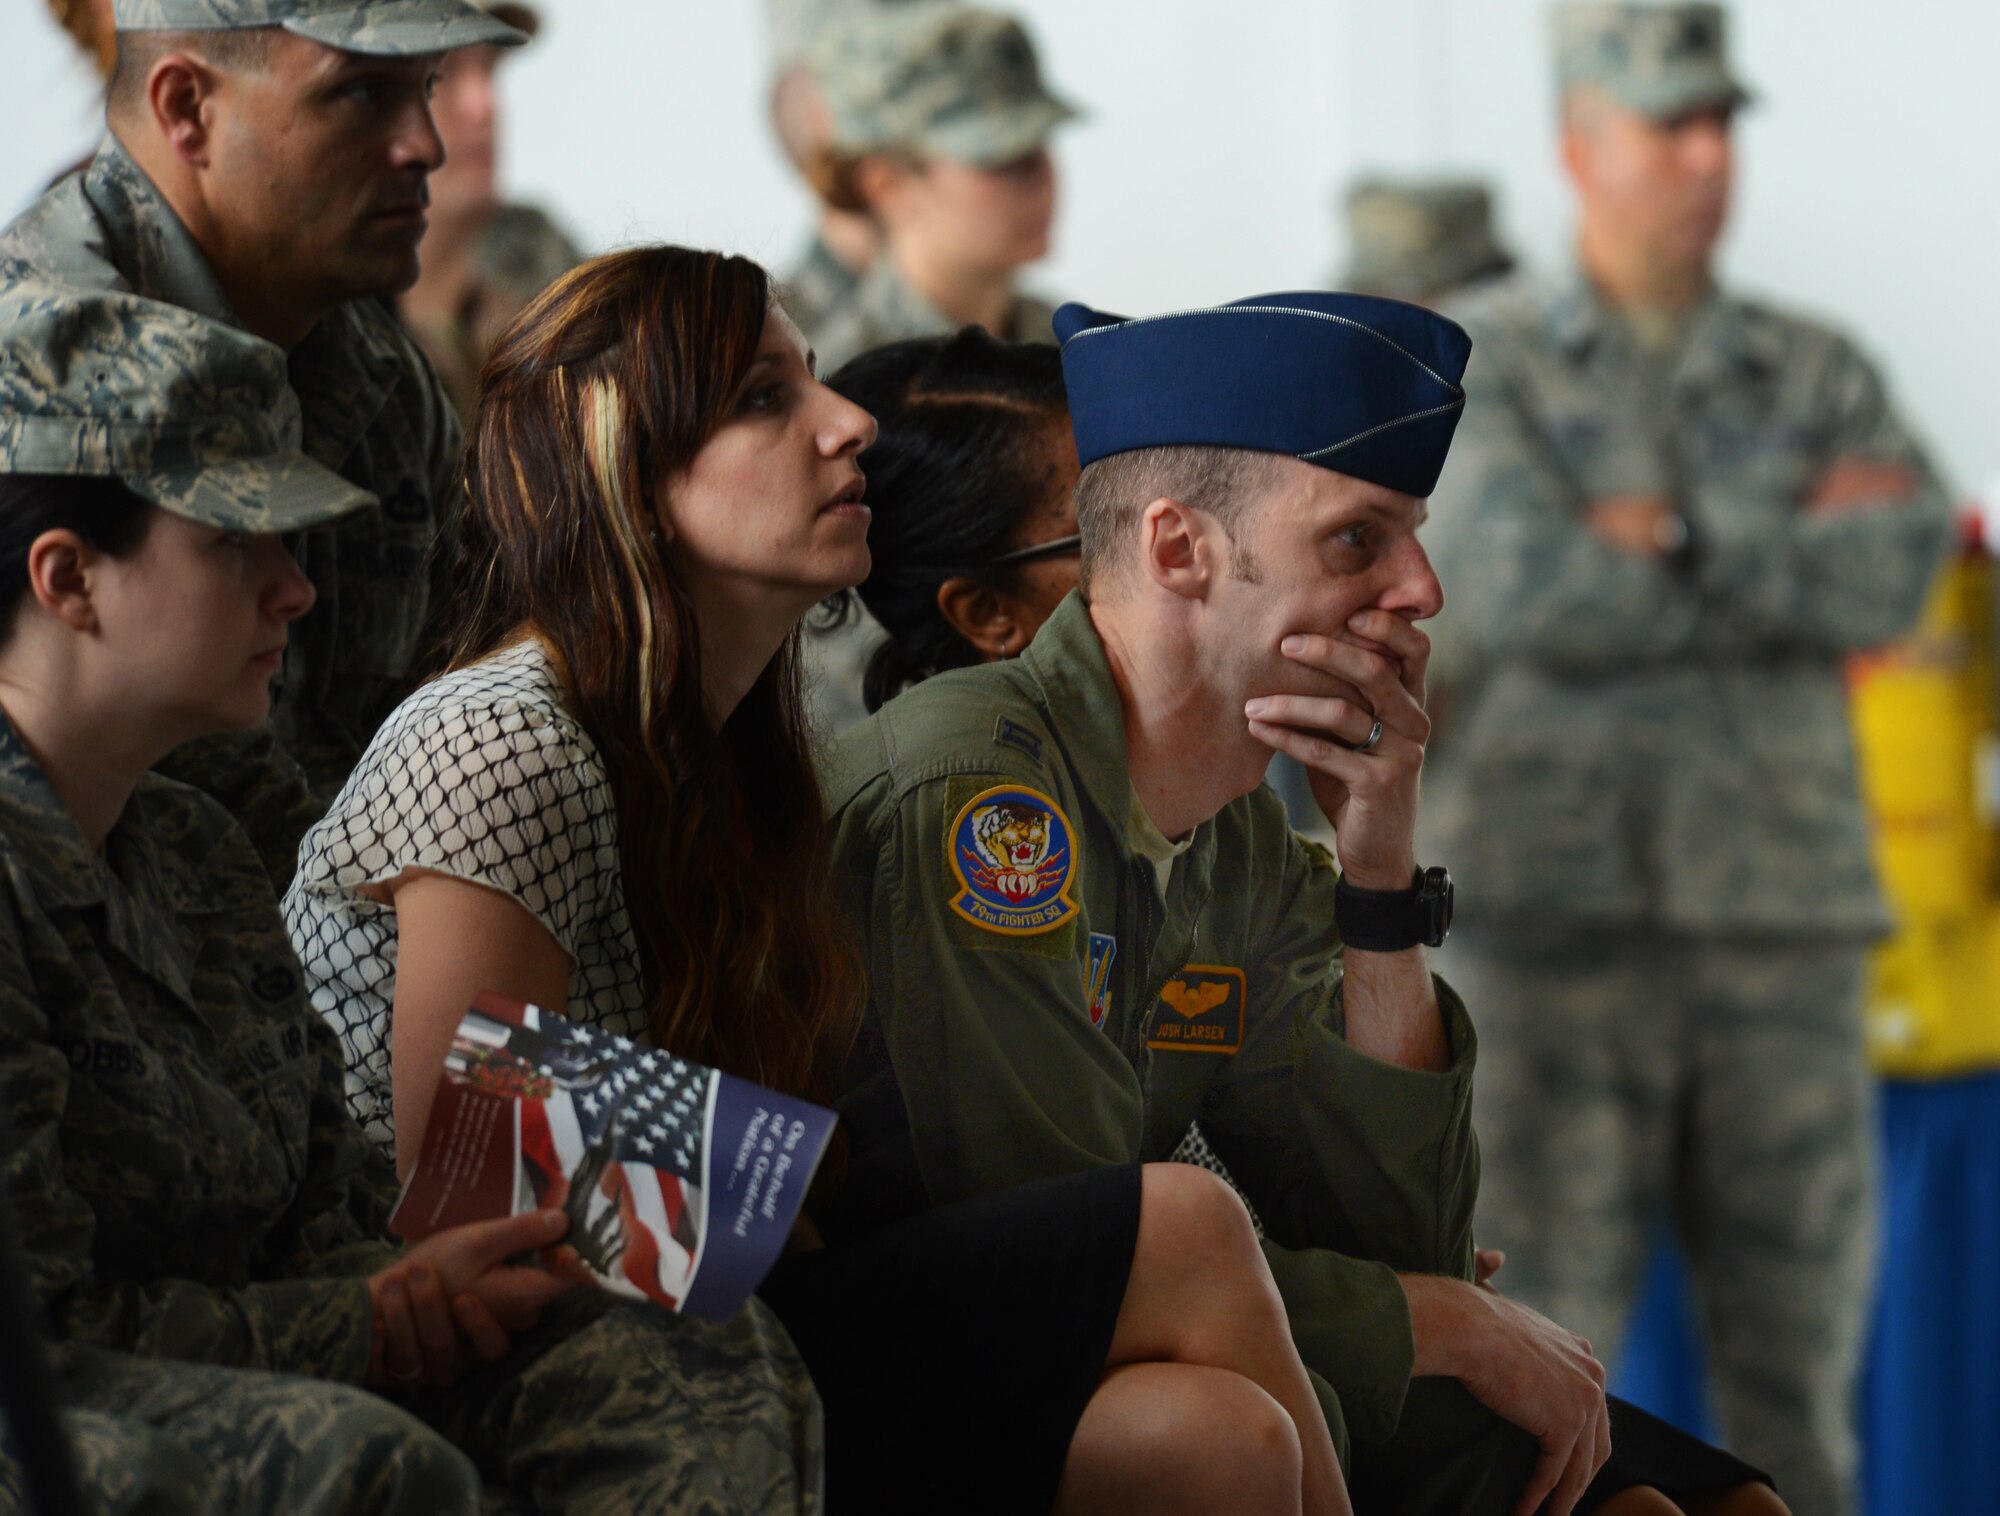 Family members, friends, co-workers mourn for Capt. James Steel, 77th Fighter Squadron pilot, during his memorial in Hangar 1200 at Shaw Air Force Base, S.C., April 30, 2013. More than 450 people attended the memorial. Steel passed away when his F-16 Fighting Falcon crashed in Afghanistan April 3, 2013. (U.S. Air Force photo by Senior Airman Tabatha Zarrella/Released)
